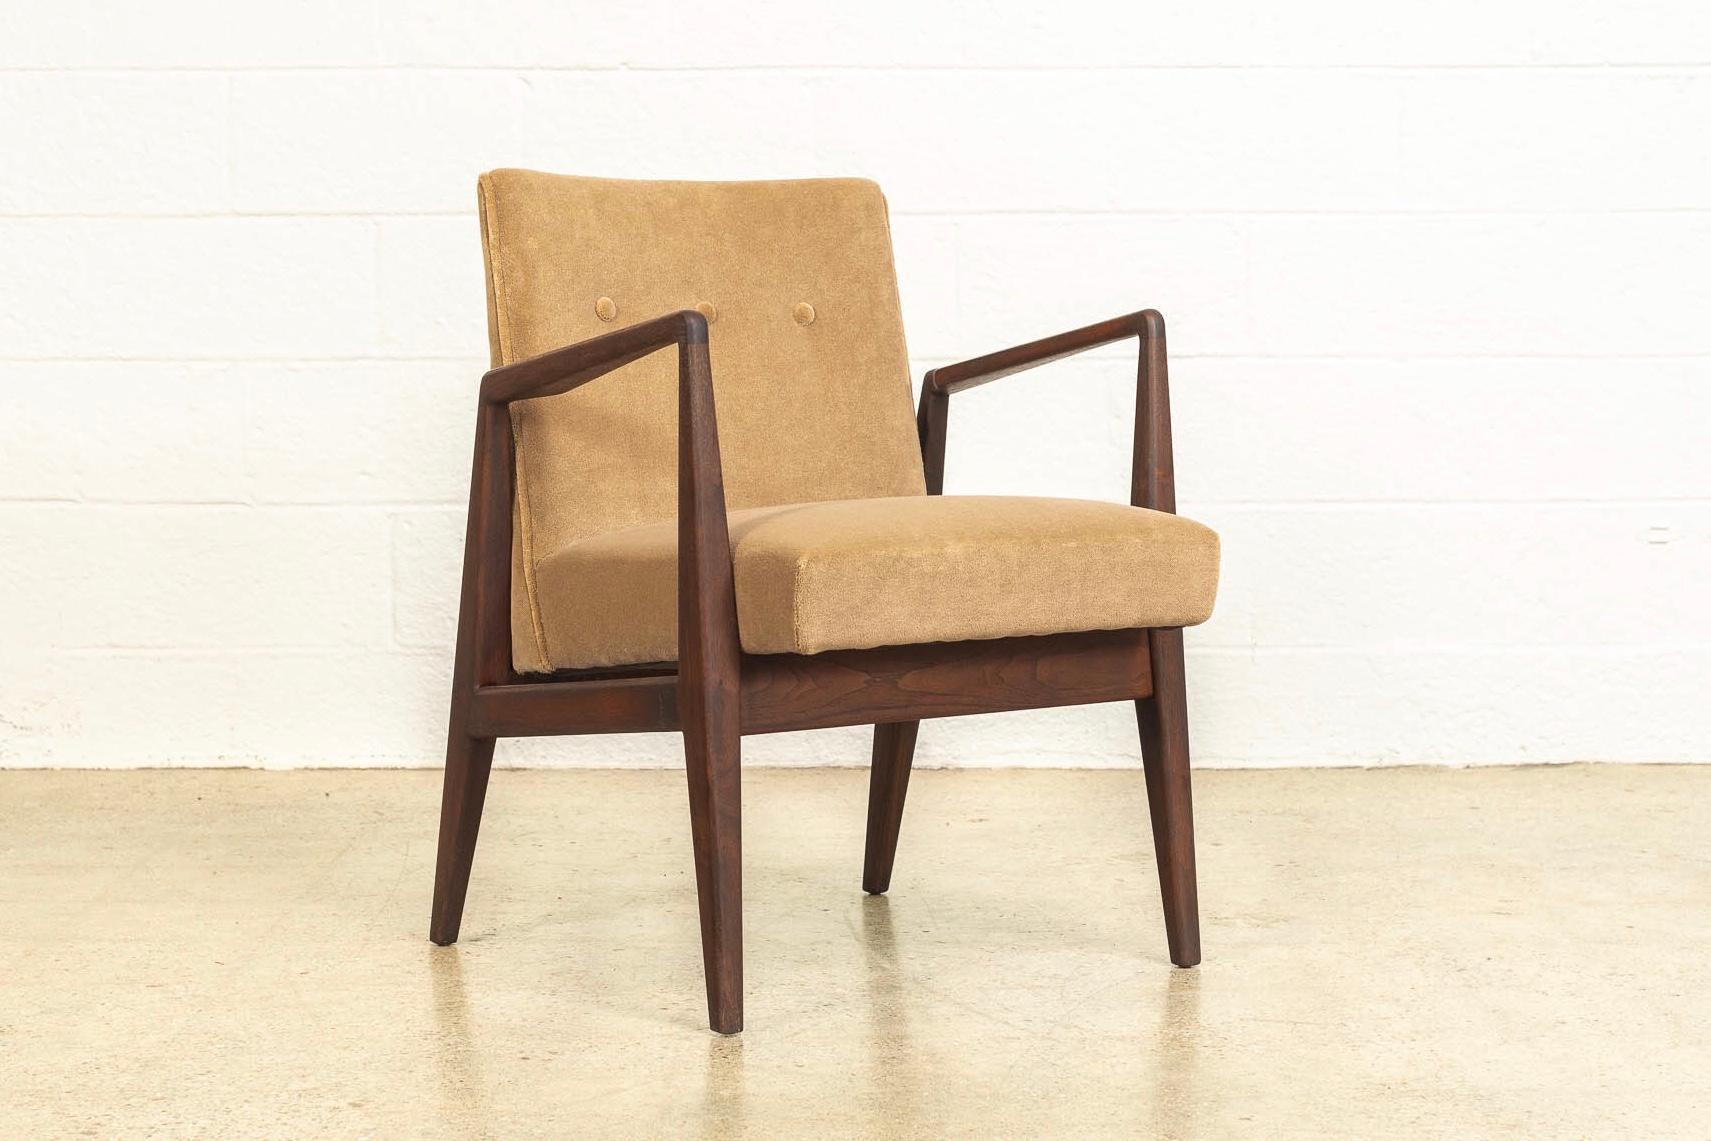 American Midcentury Jens Risom Walnut Wood and Upholstered Lounge Armchairs, a Pair For Sale